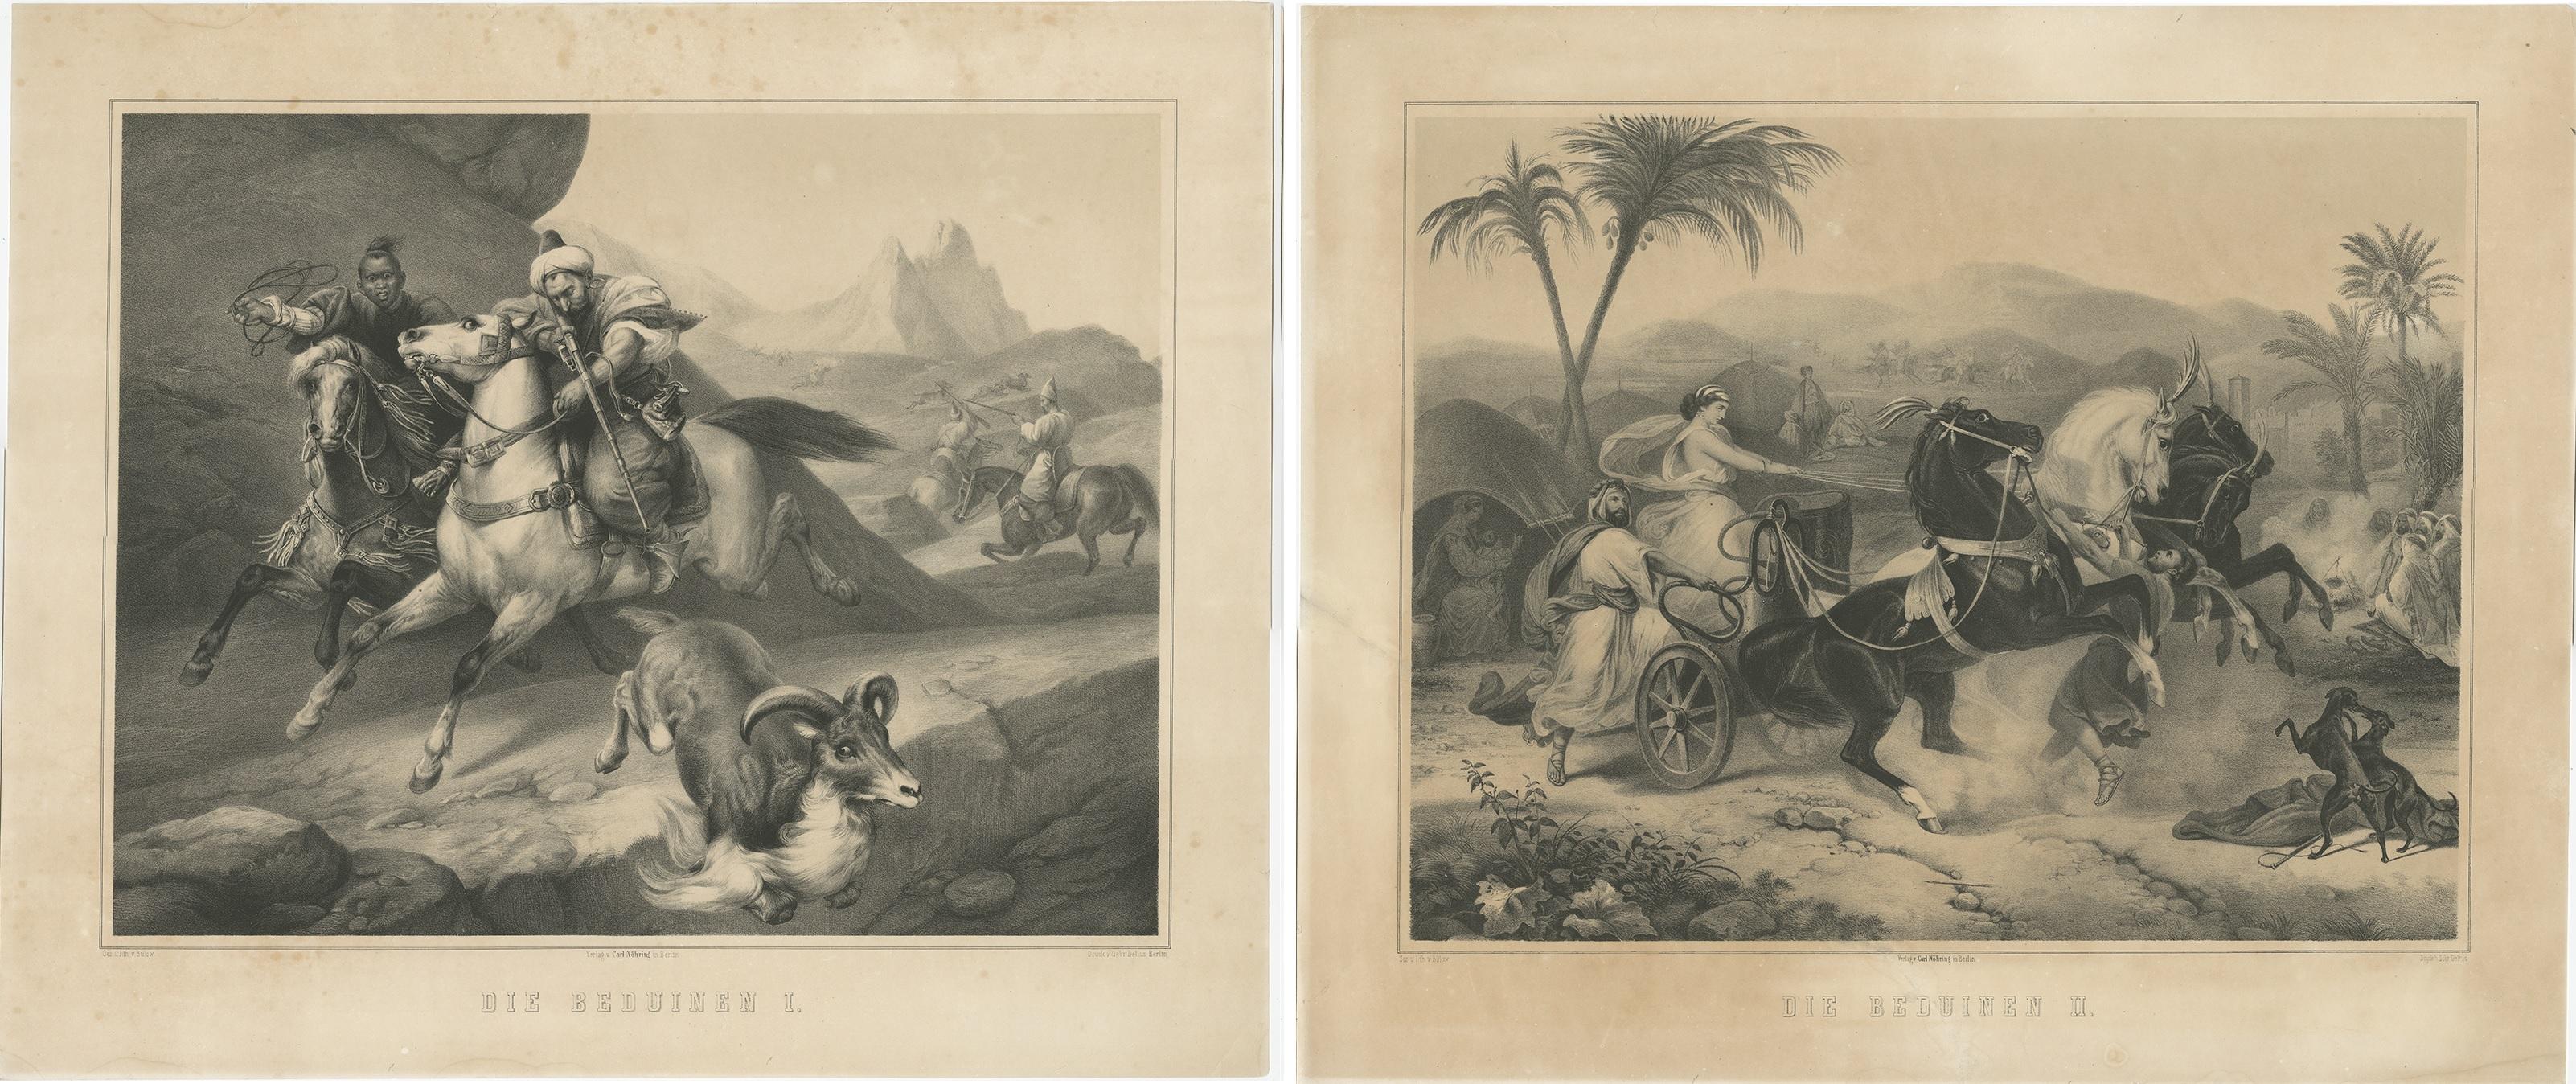 19th Century Set of 2 Antique Prints of the Bedouin Nomadic Arab Tribes, circa 1870 For Sale